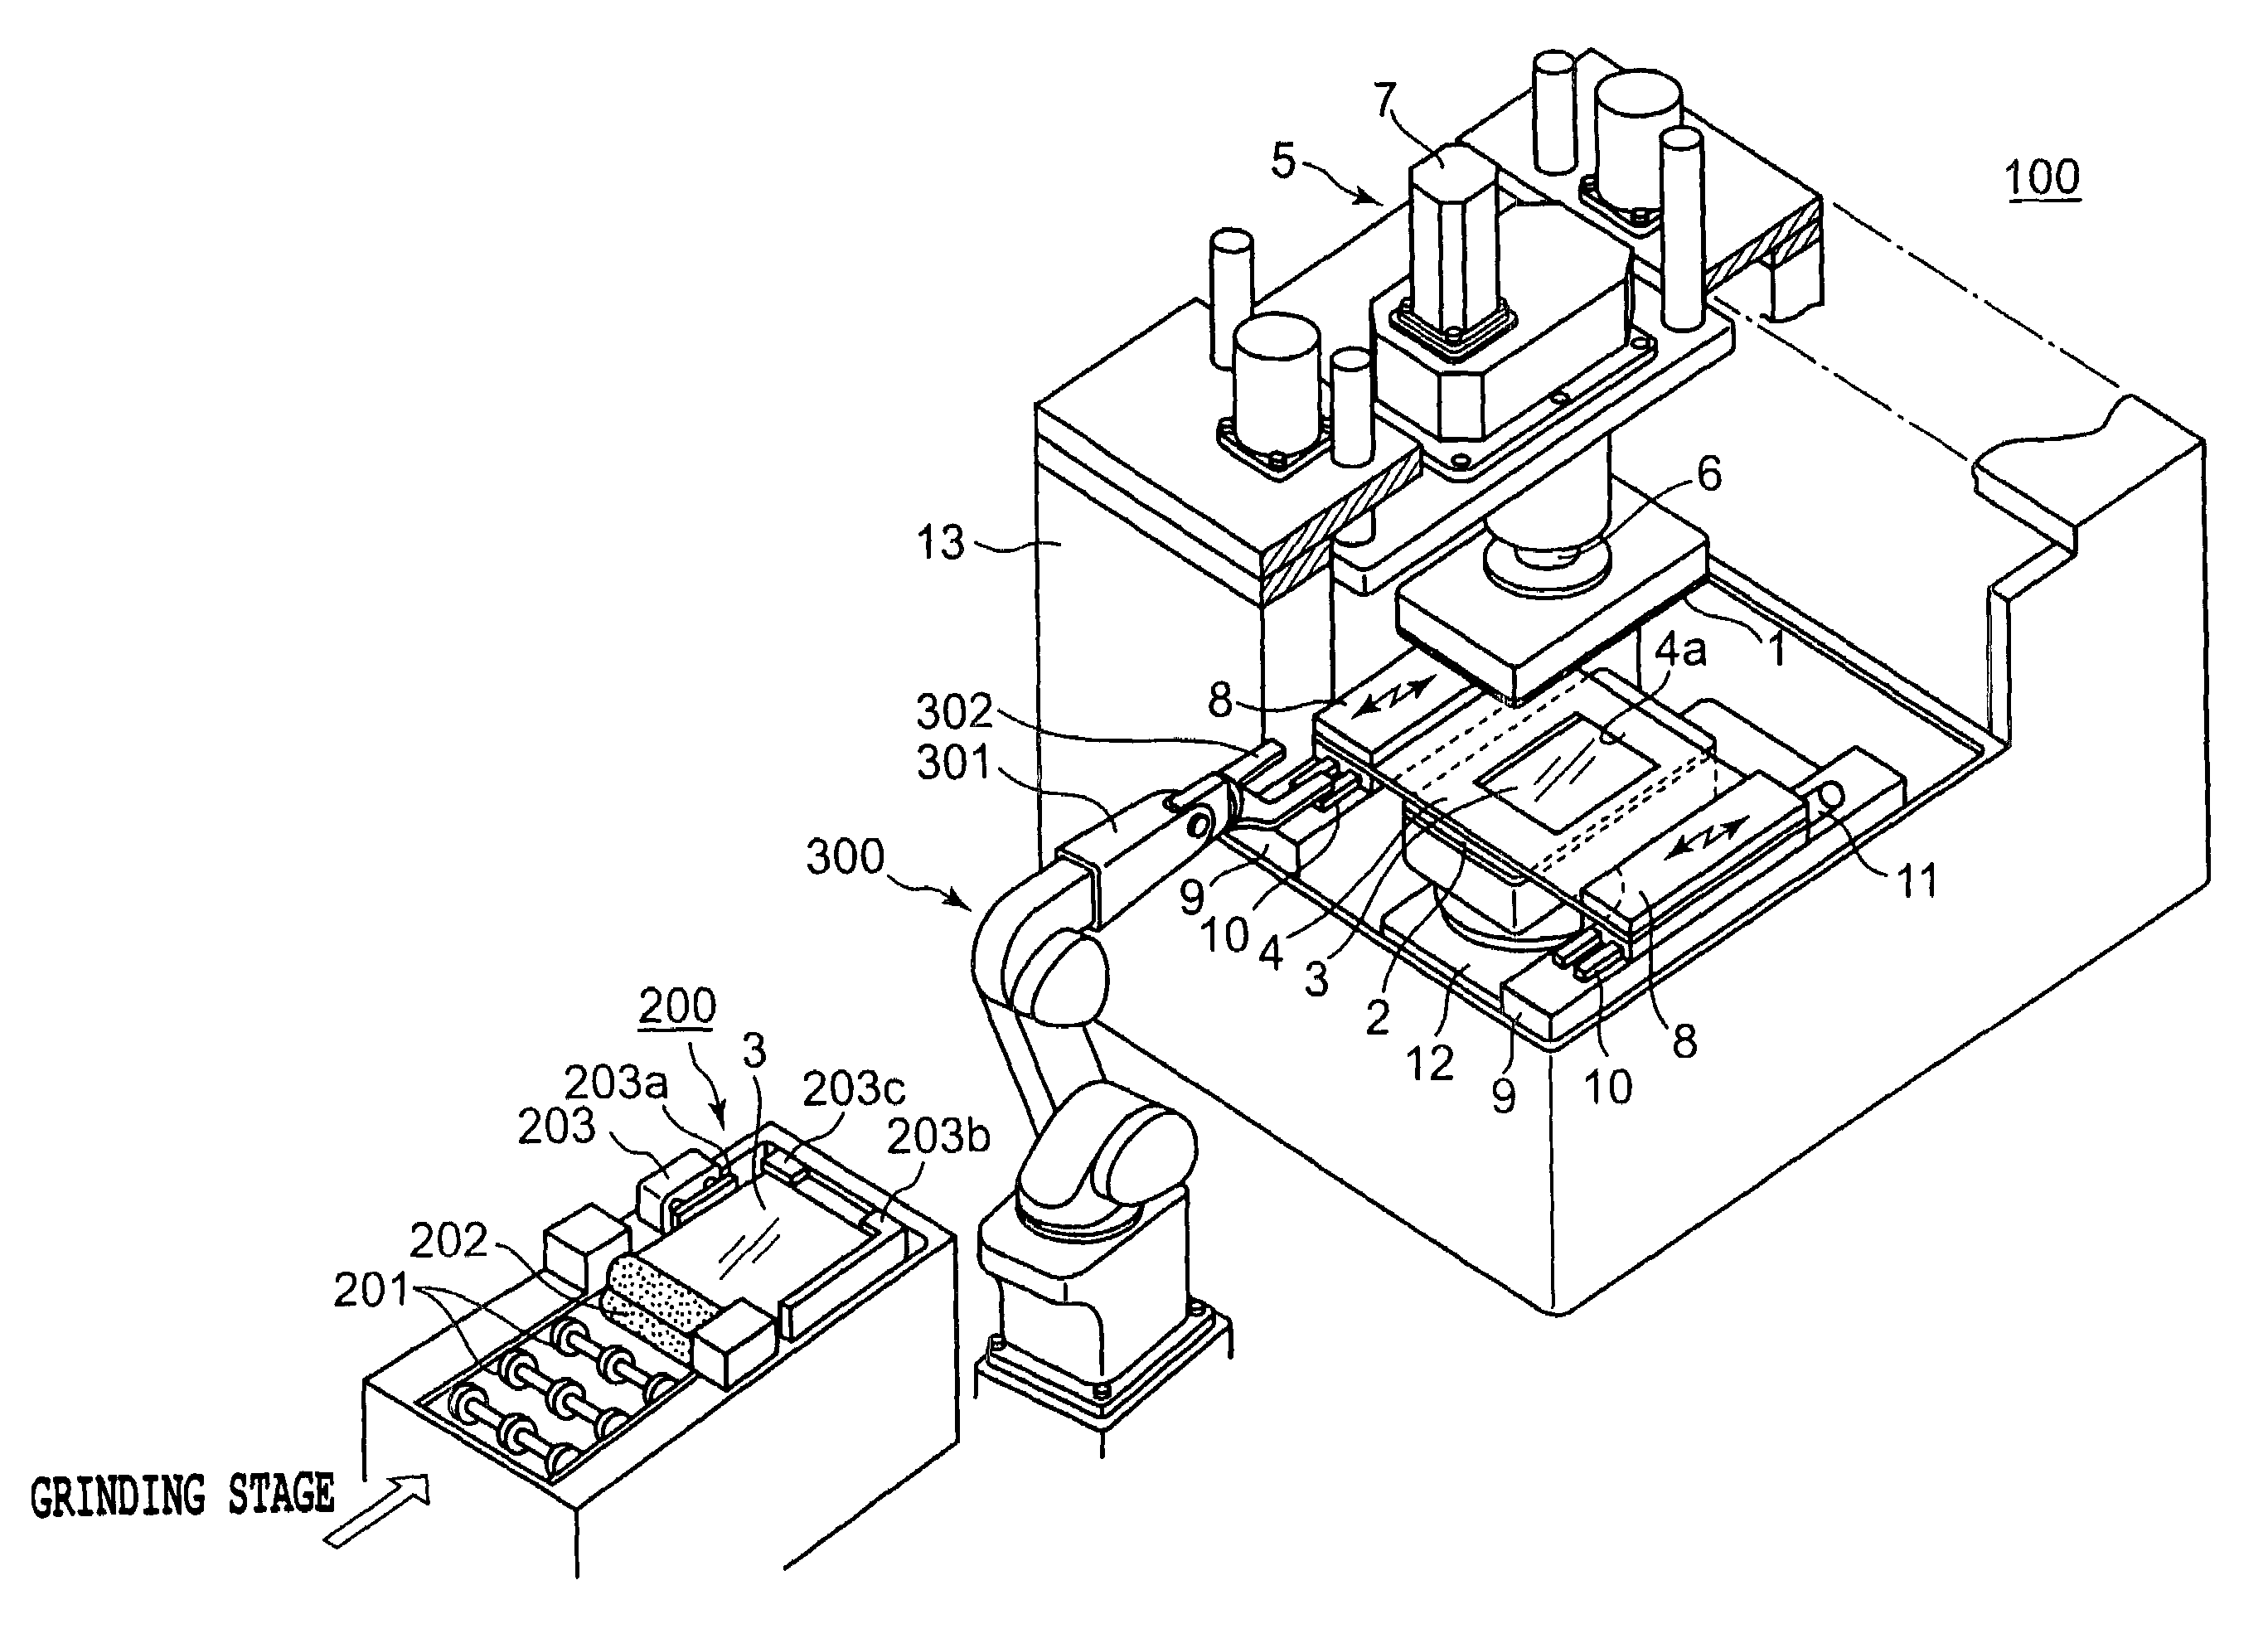 Equipment and method for polishing both sides of a rectangular substrate